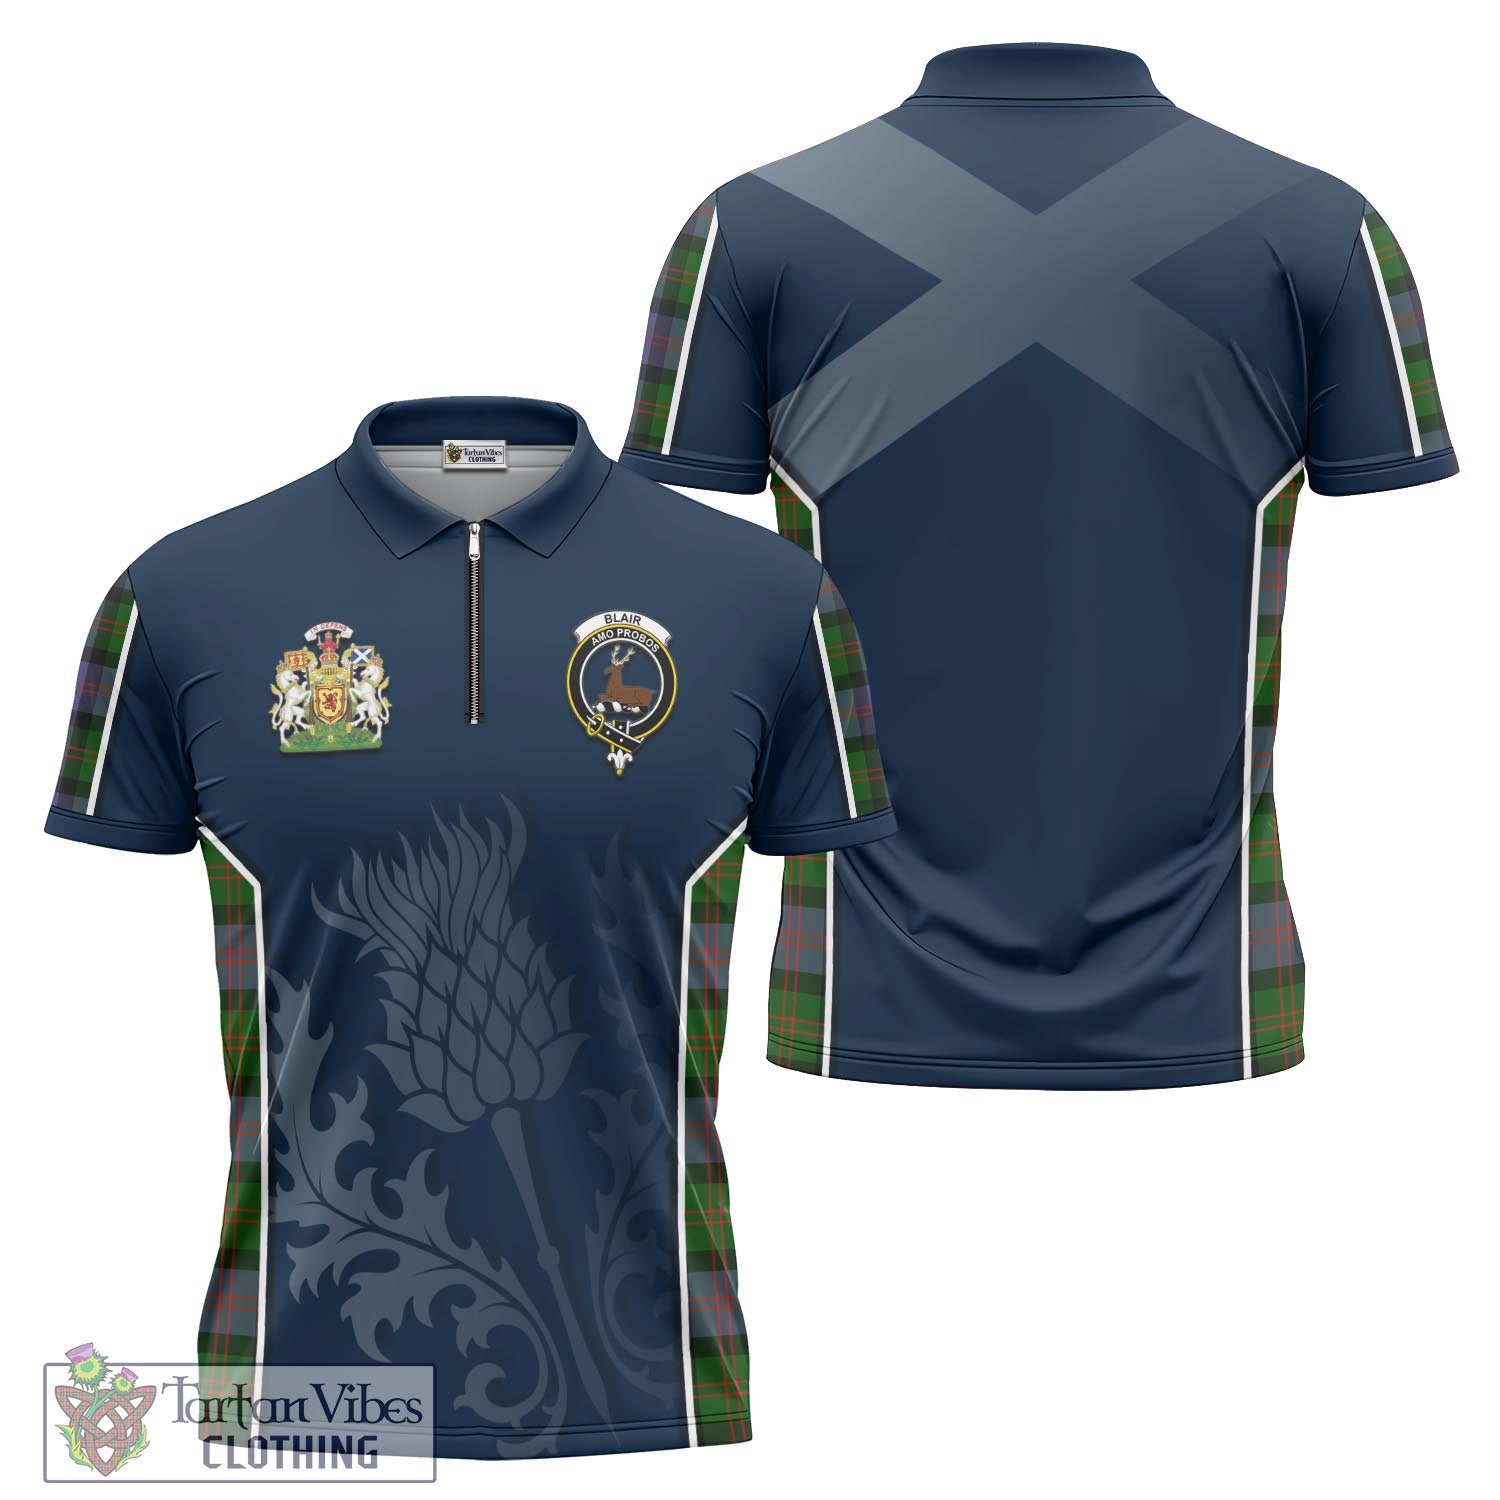 Tartan Vibes Clothing Blair Modern Tartan Zipper Polo Shirt with Family Crest and Scottish Thistle Vibes Sport Style